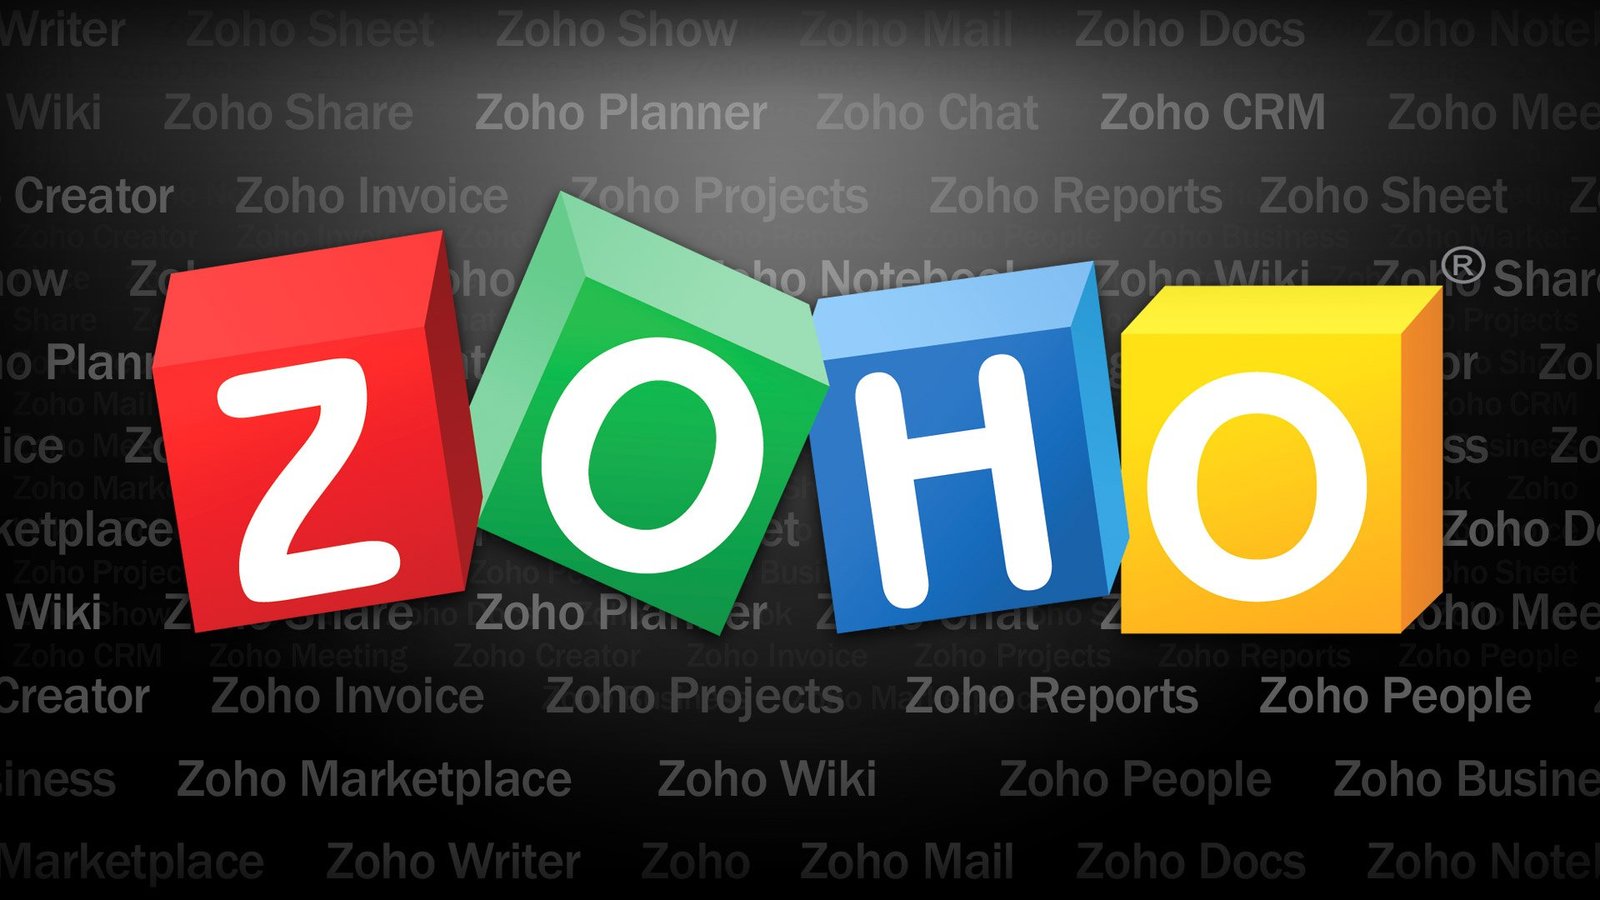 Zoho Products